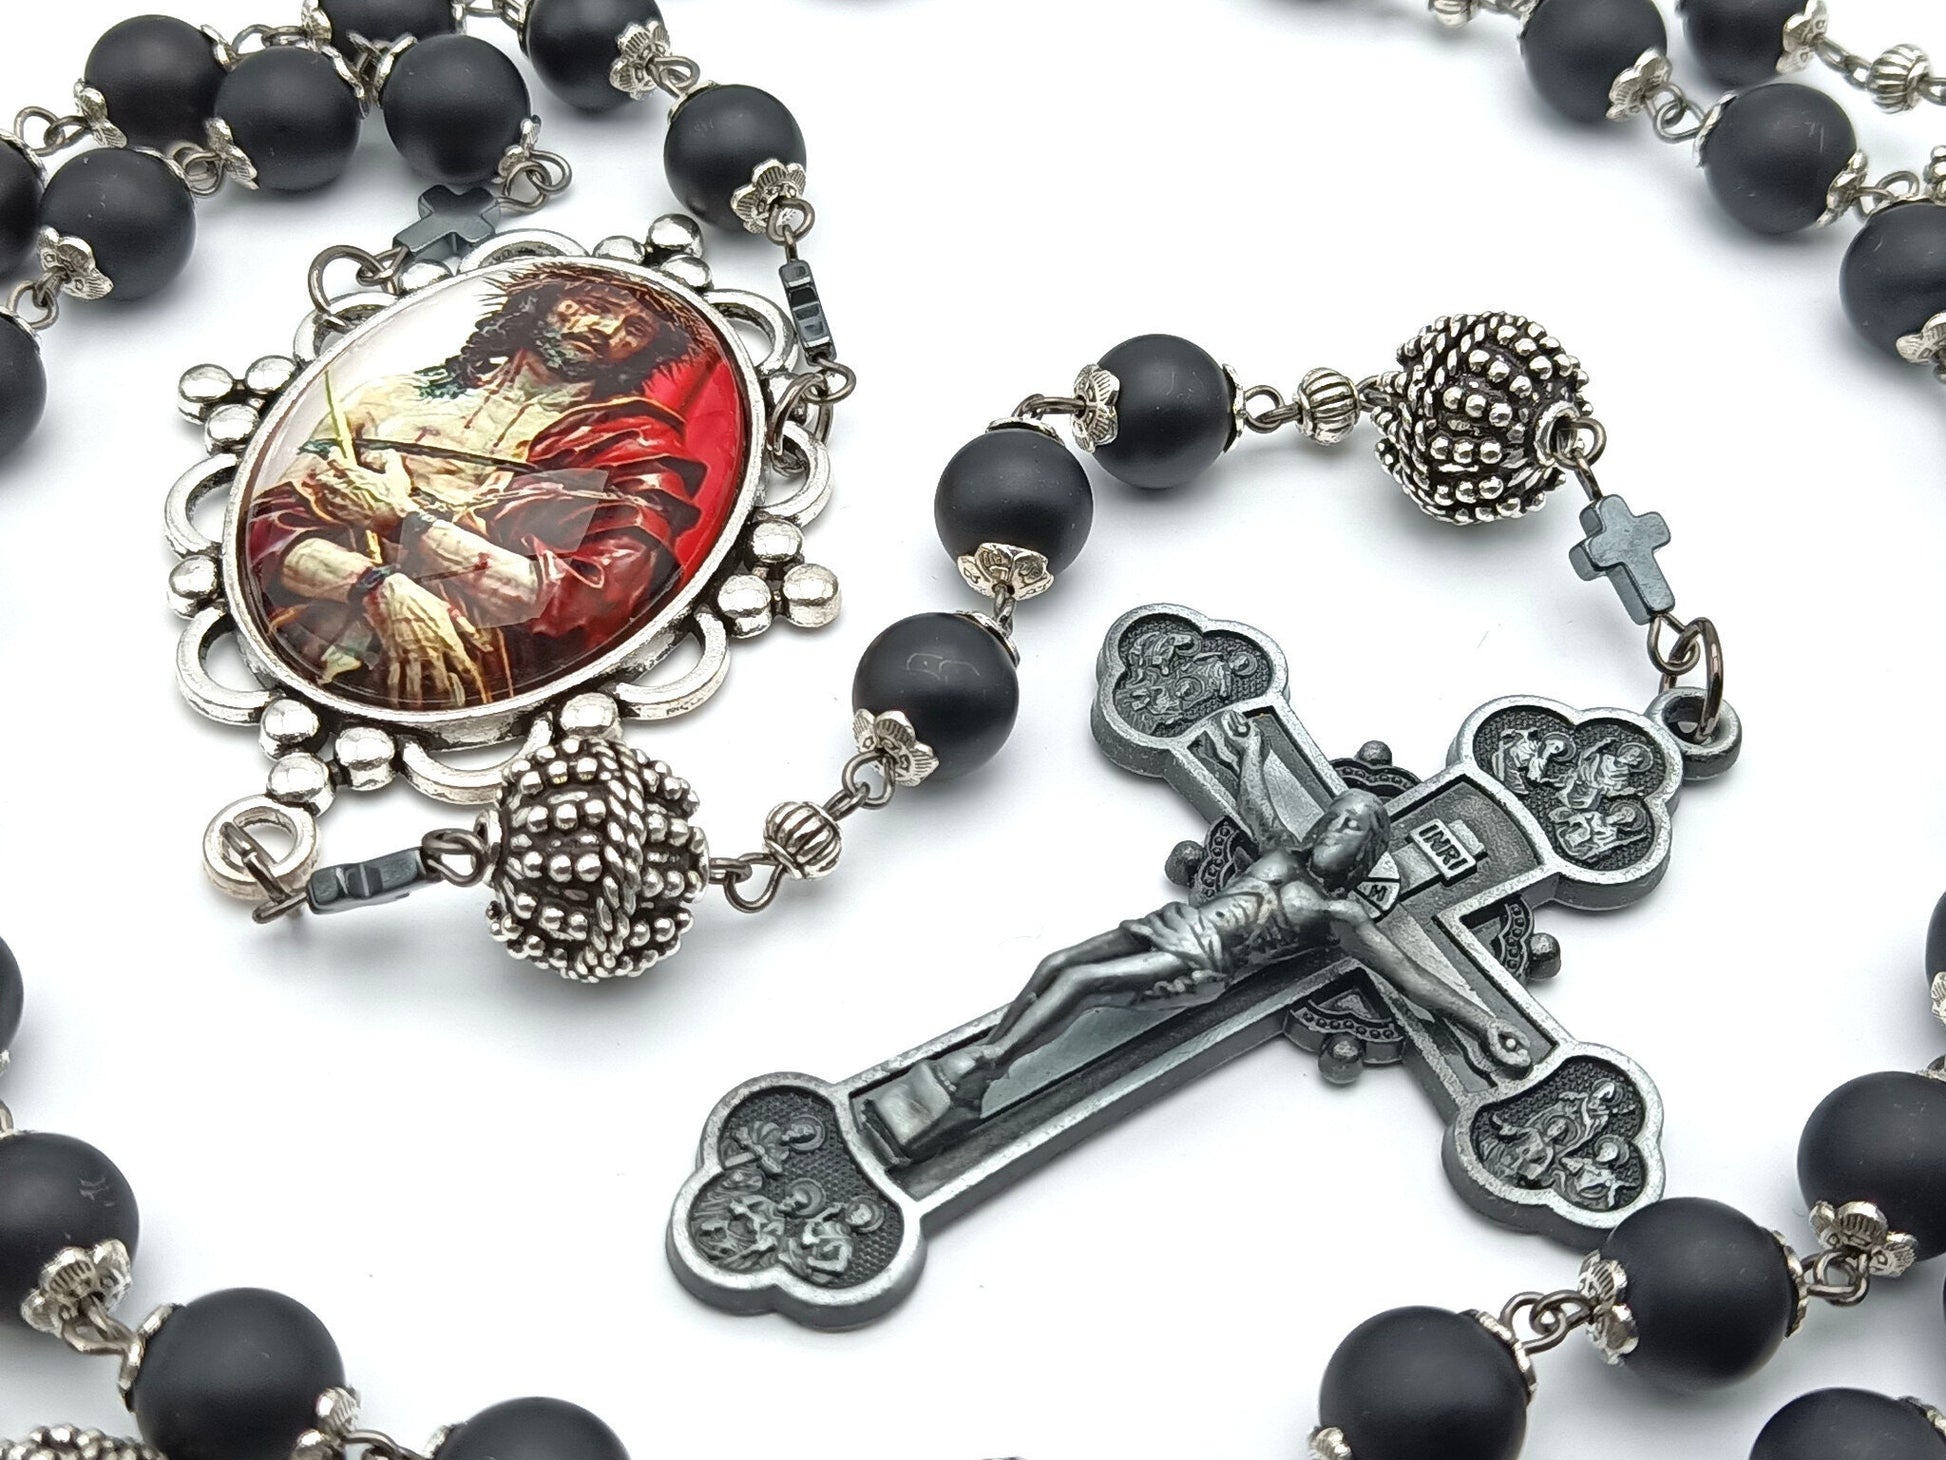 The Crucifixion unique rosary beads with onyx beads, silver pater beads, pewter twelve Apostles crucifix and picture centre medal.